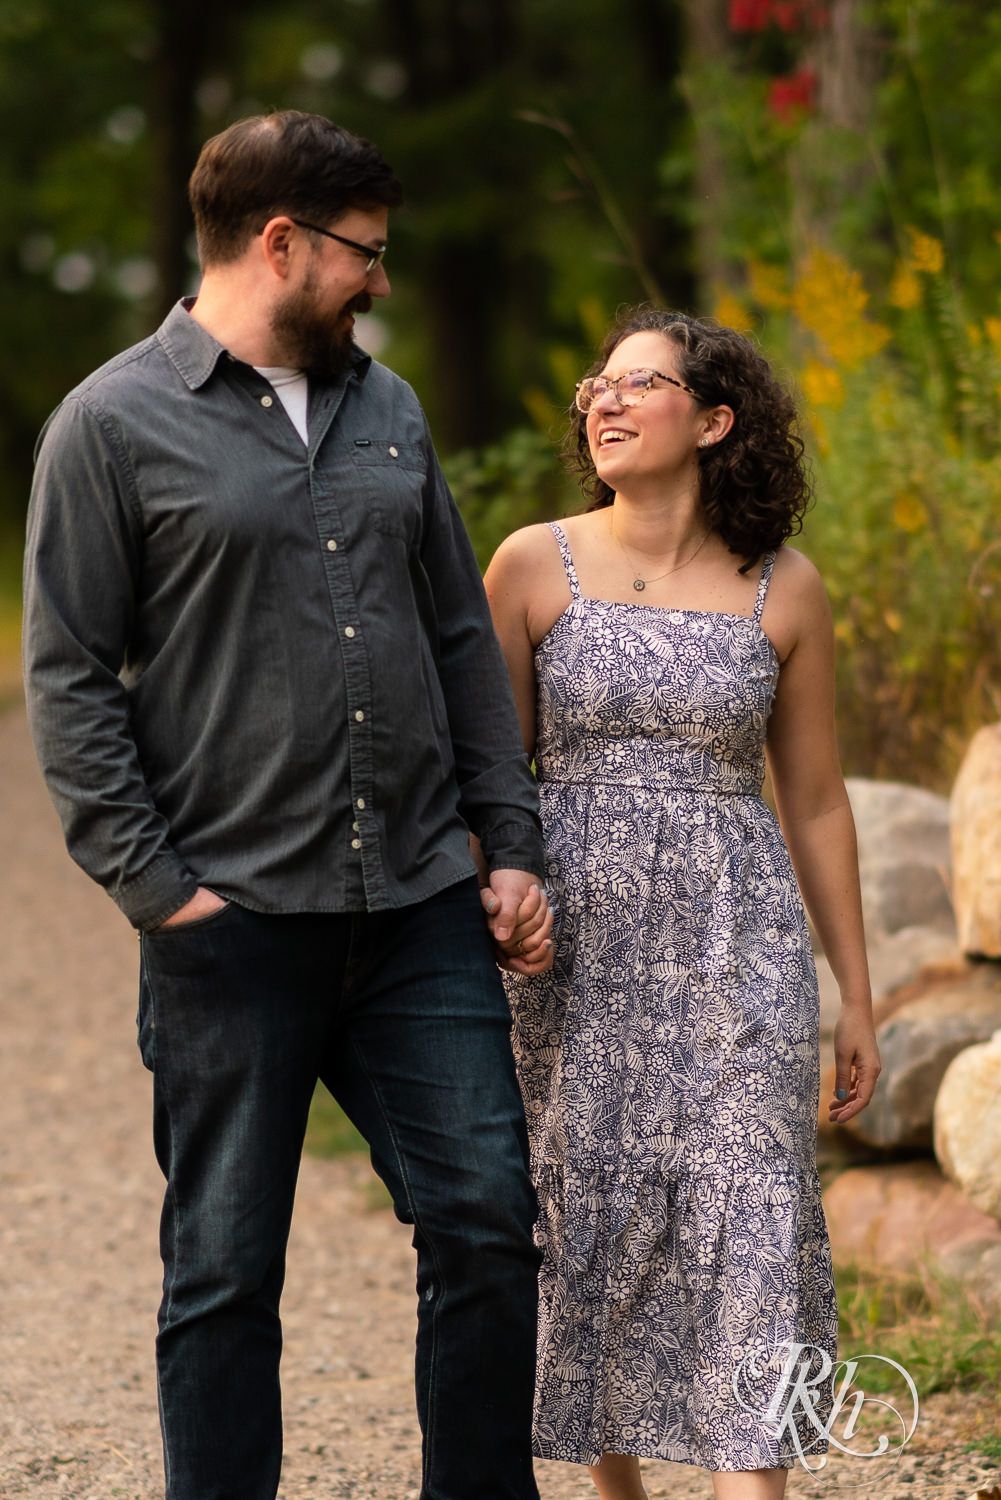 Man and woman in glasses laughing and walking at sunset engagement session.